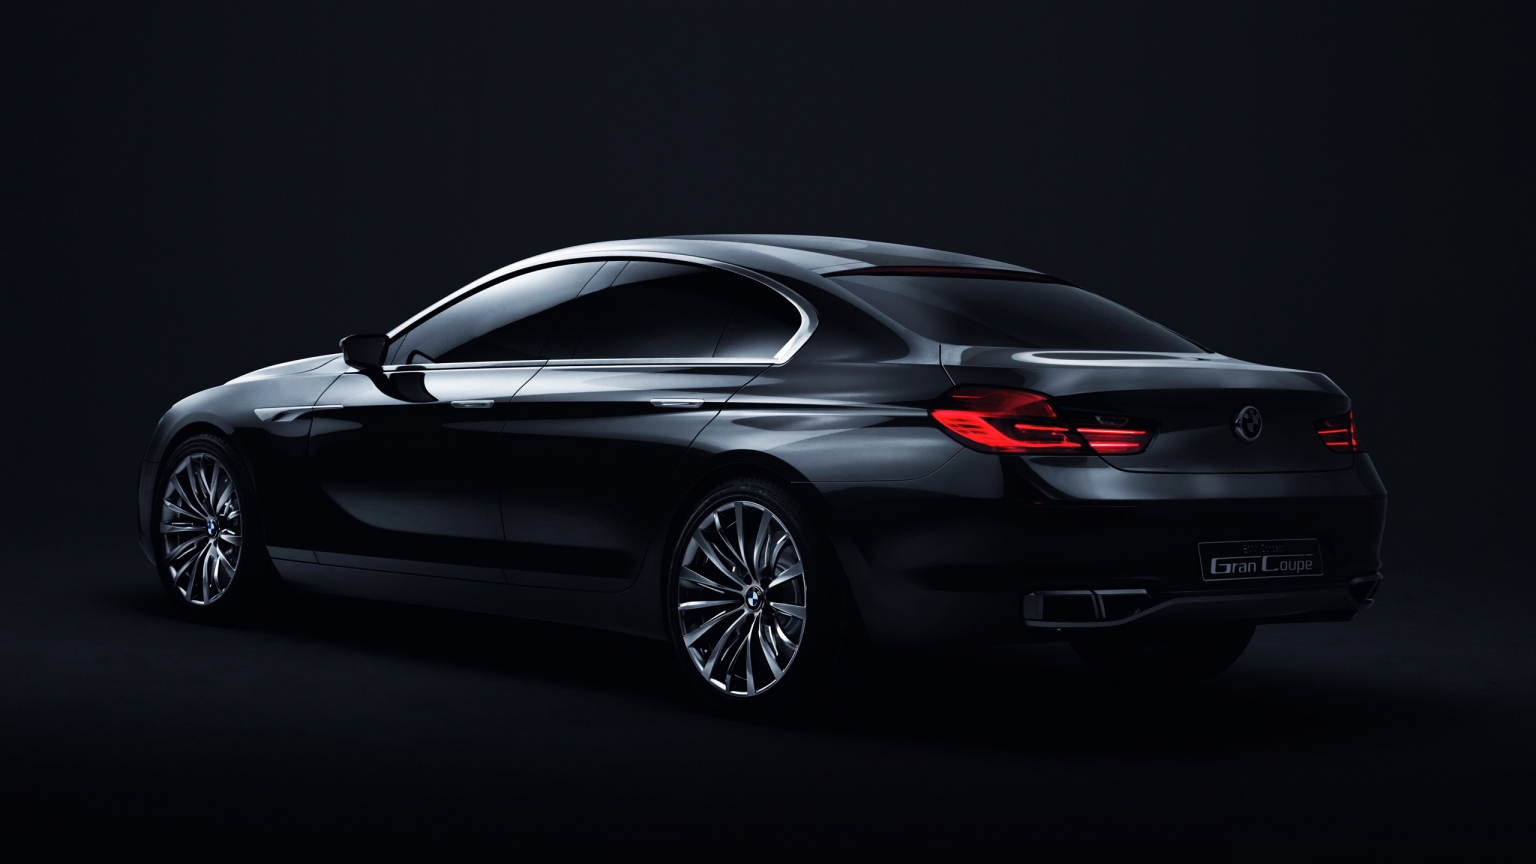 BMW Gran Coupe Rear for 1536 x 864 HDTV resolution